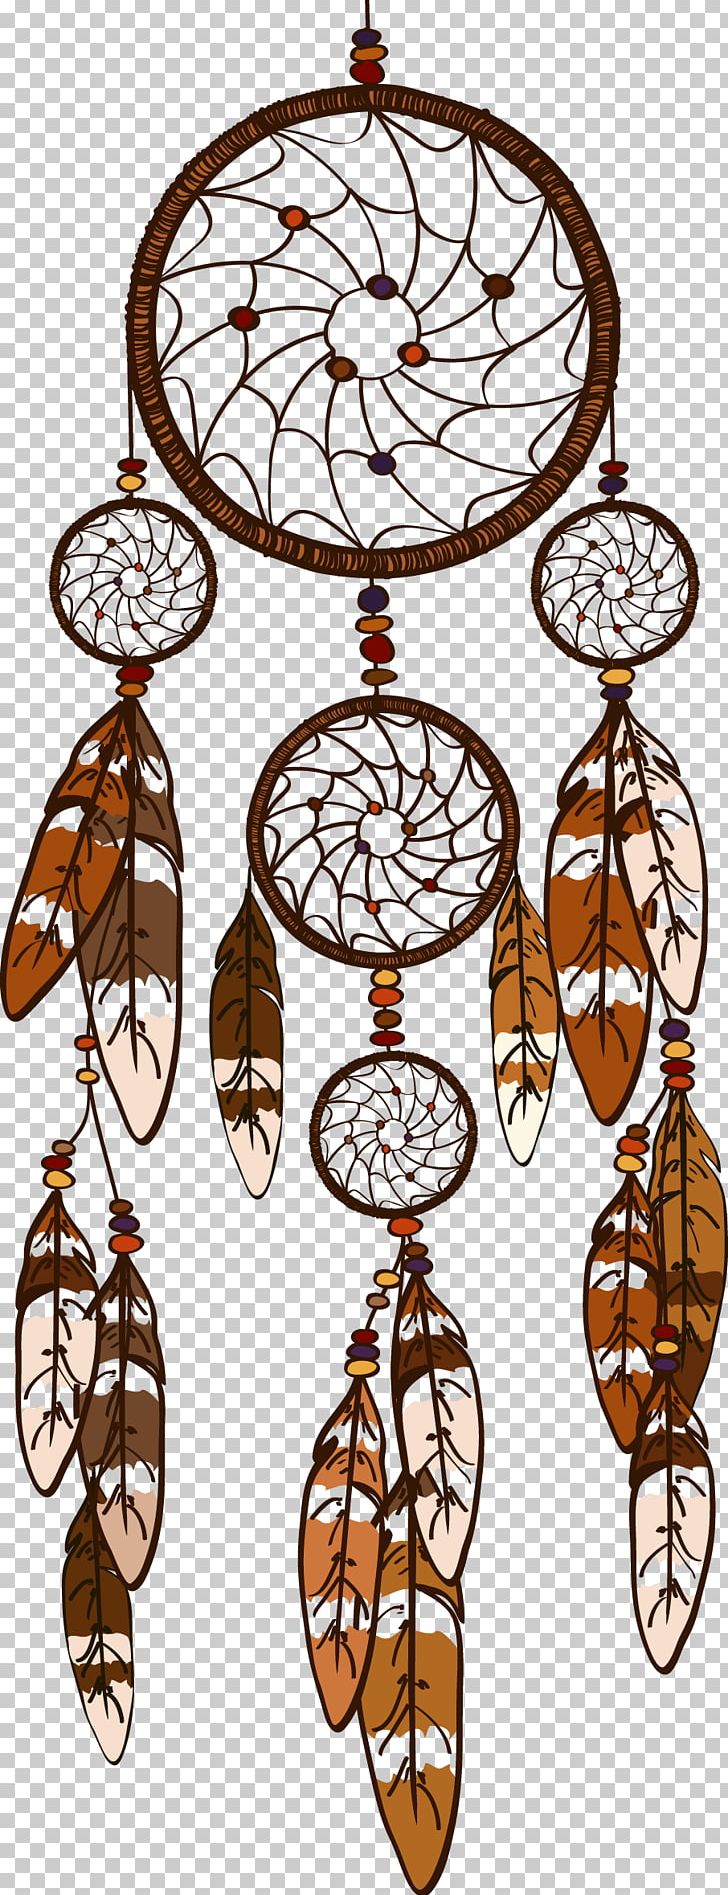 Dreamcatcher Feather Illustration PNG, Clipart, Christmas Decoration, Circle, Decor, Decor, Decoration Free PNG Download